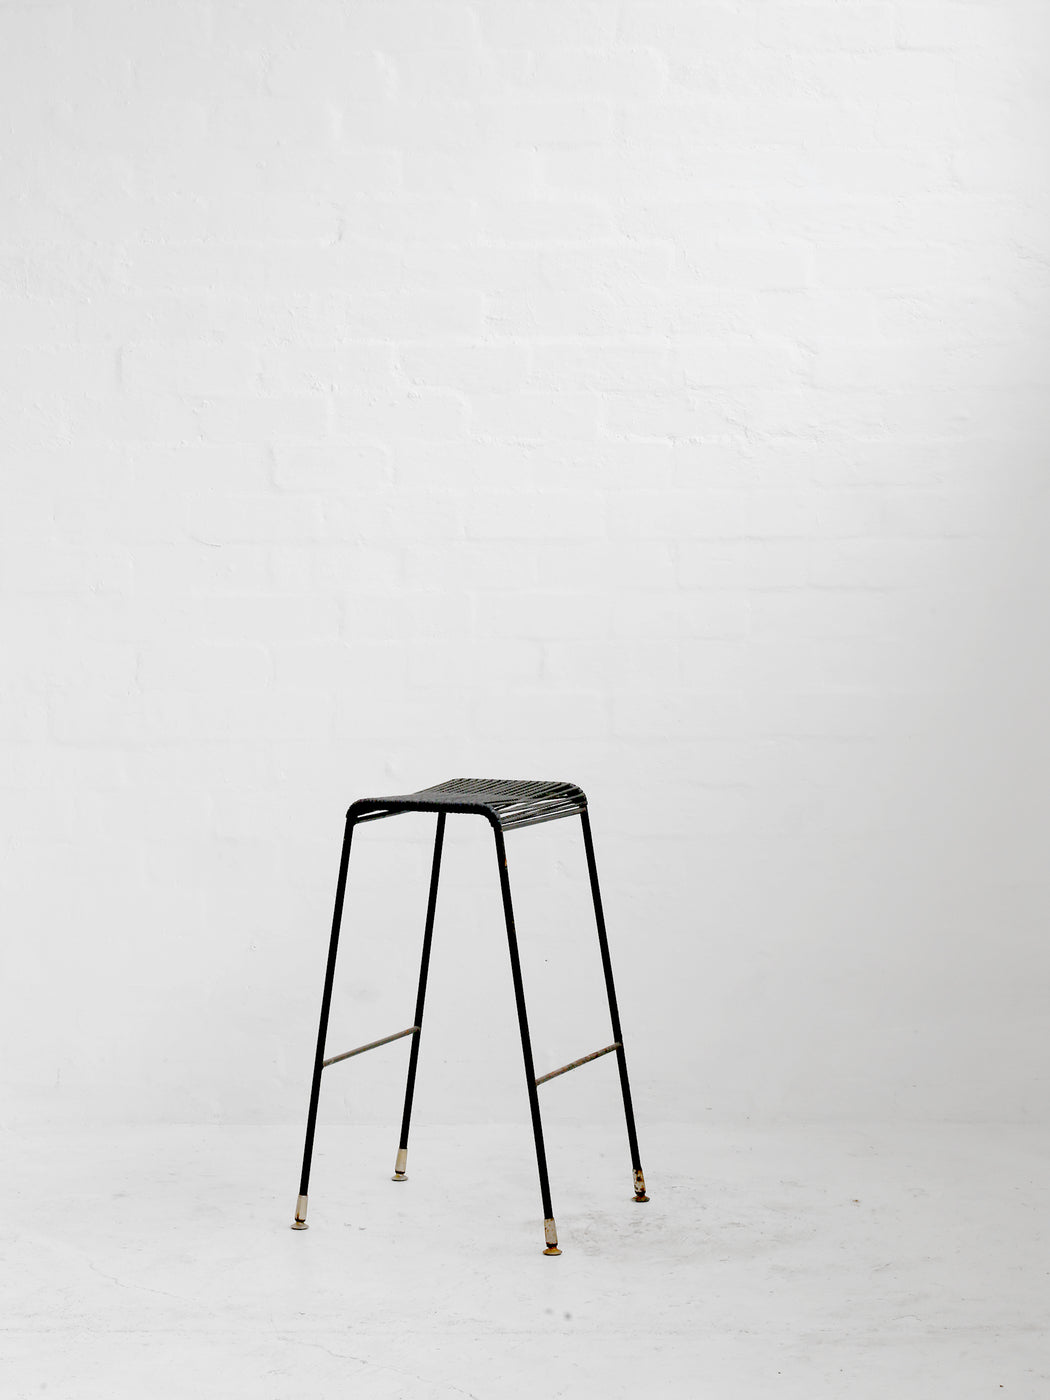 Clement Meadmore Cord Stool